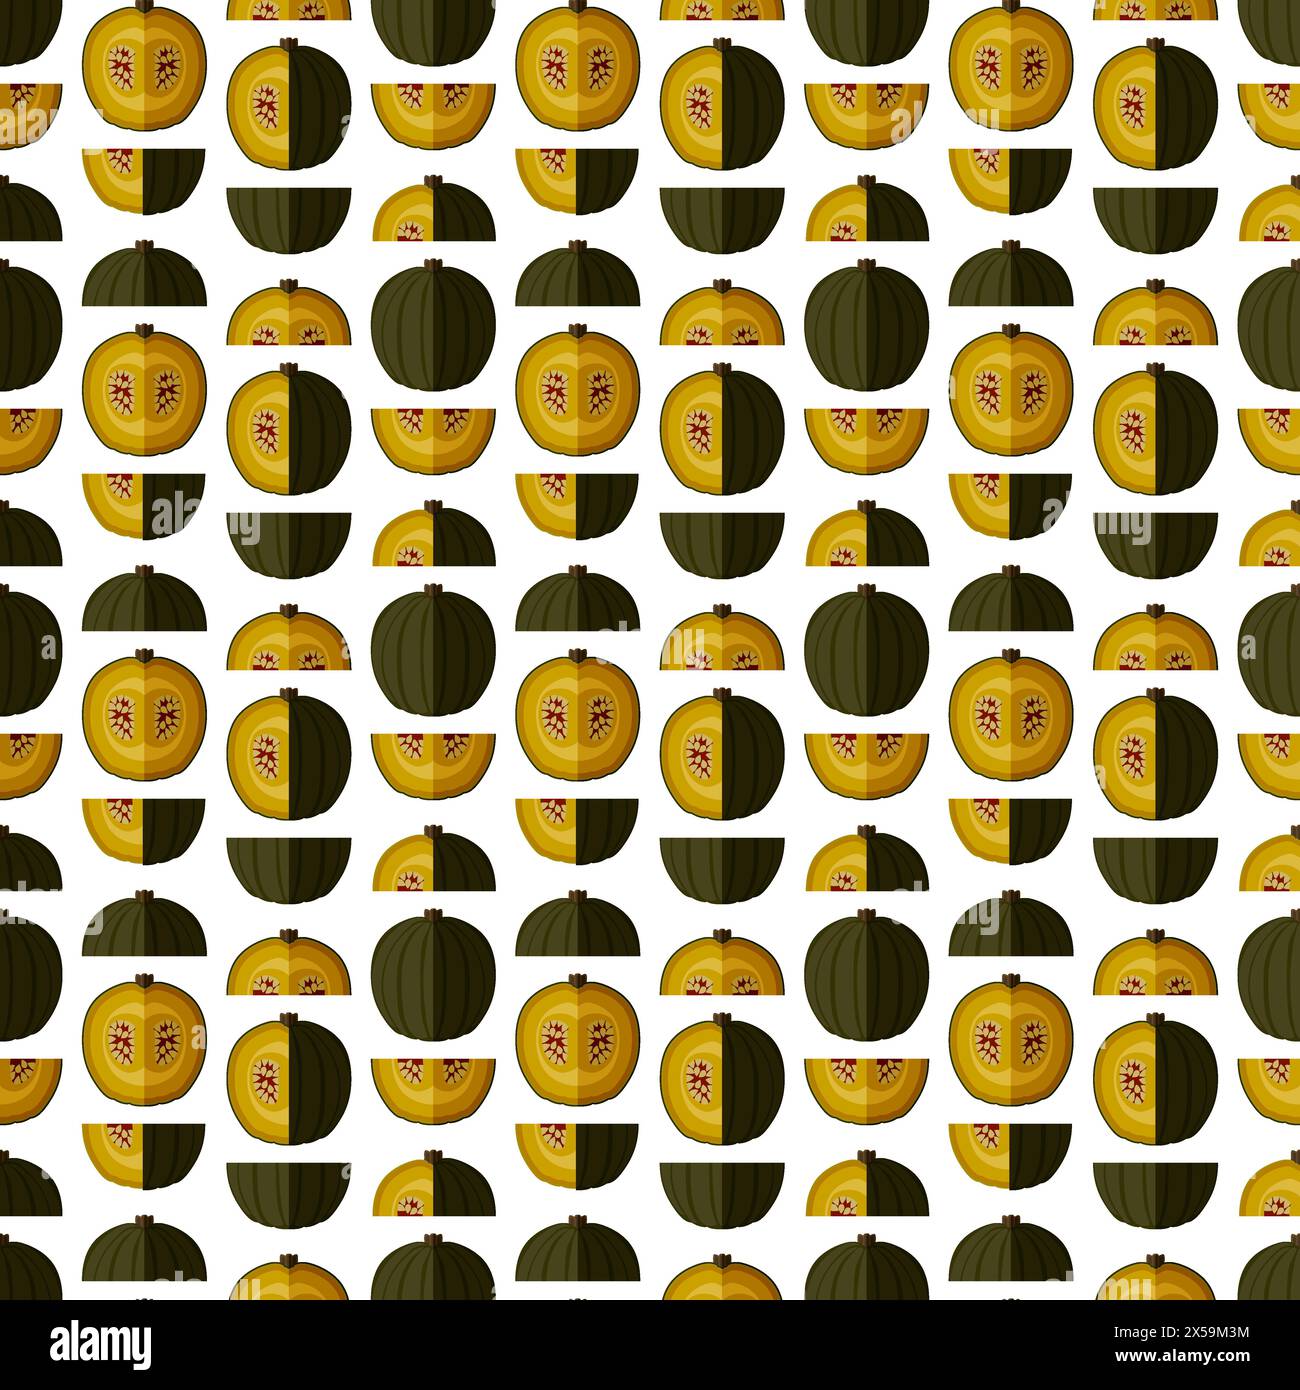 Seamless pattern with Zapallo Macre Squash. Winter squash. Cucurbita maxima. Fruit and vegetables. Flat style. Isolated vector illustration. Stock Vector